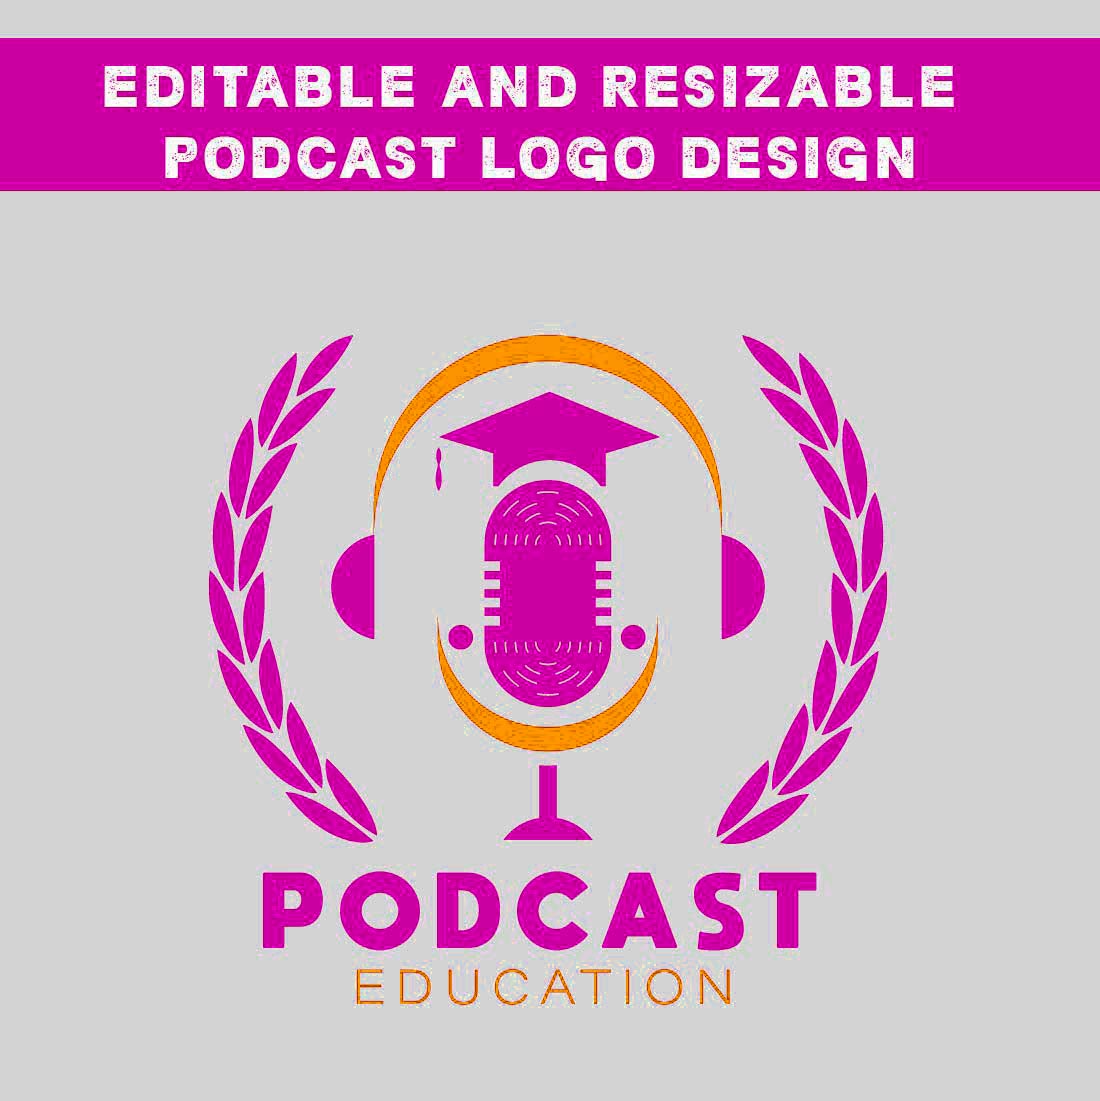 Editable and Resizable Podcast Logo Design Preview image.